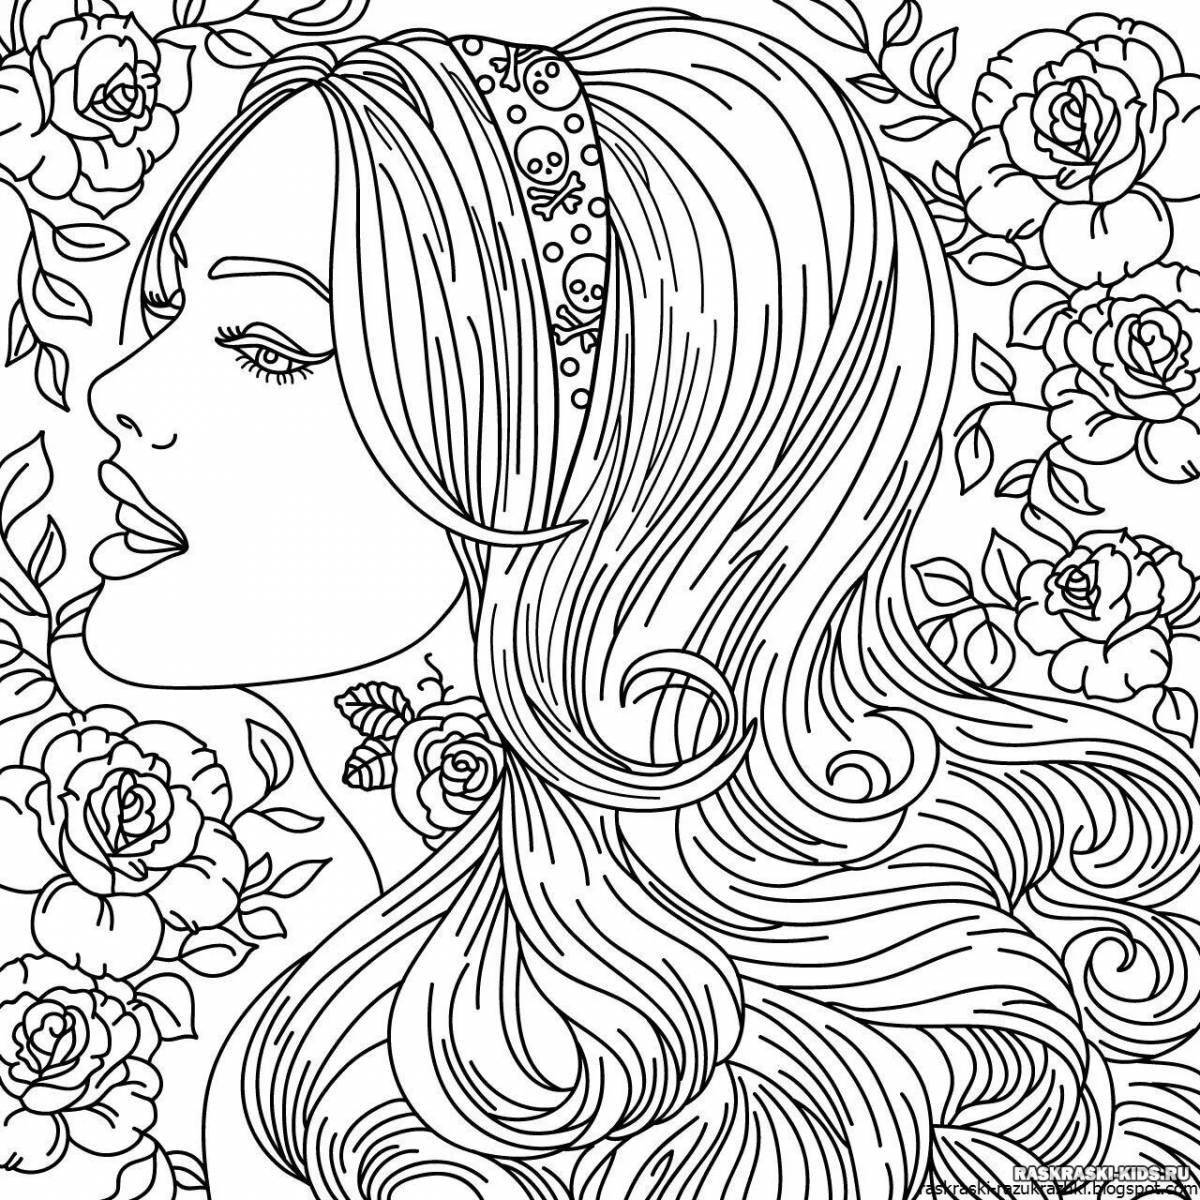 Super antistress coloring book for girls 9-10 years old